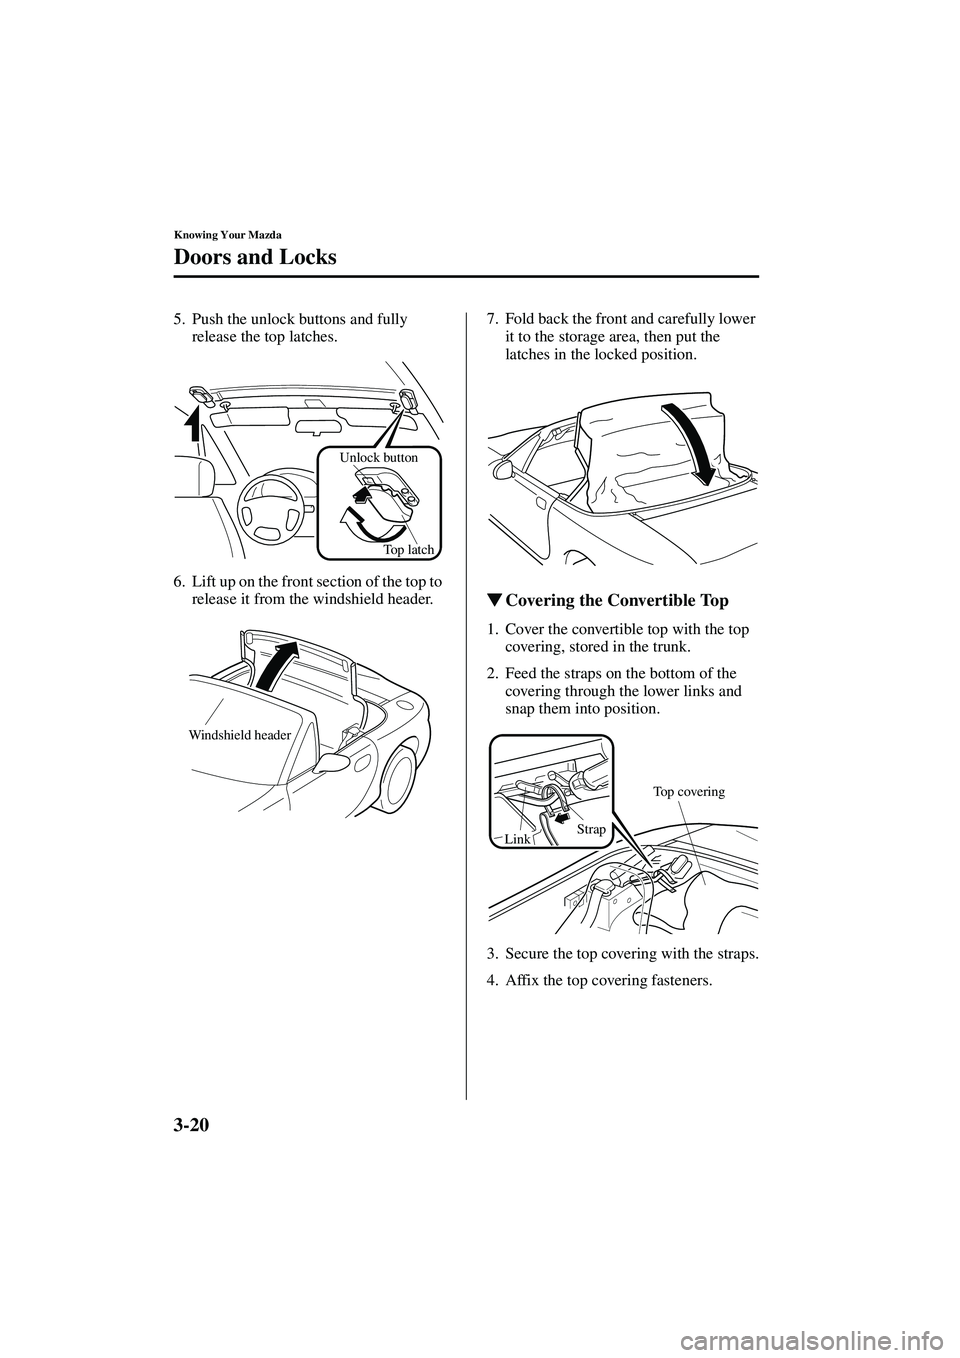 MAZDA MODEL MX-5 MIATA 2004 Workshop Manual 3-20
Knowing Your Mazda
Doors and Locks
Form No. 8S15-EA-03G
5. Push the unlock buttons and fully release the top latches.
6. Lift up on the front section of the top to  release it from the windshield